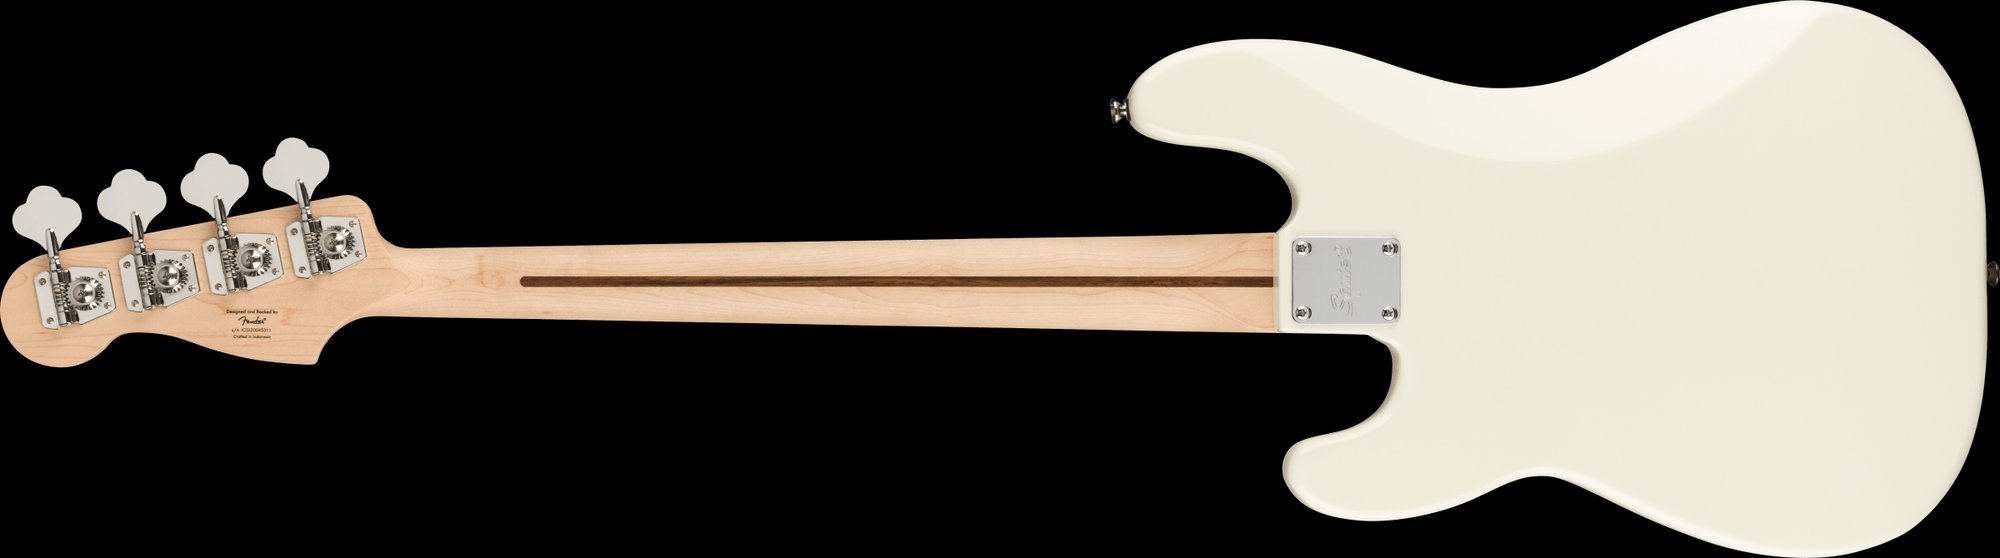 Squier Affinity Series Precision Bass PJ Maple Fingerboard Olympic White